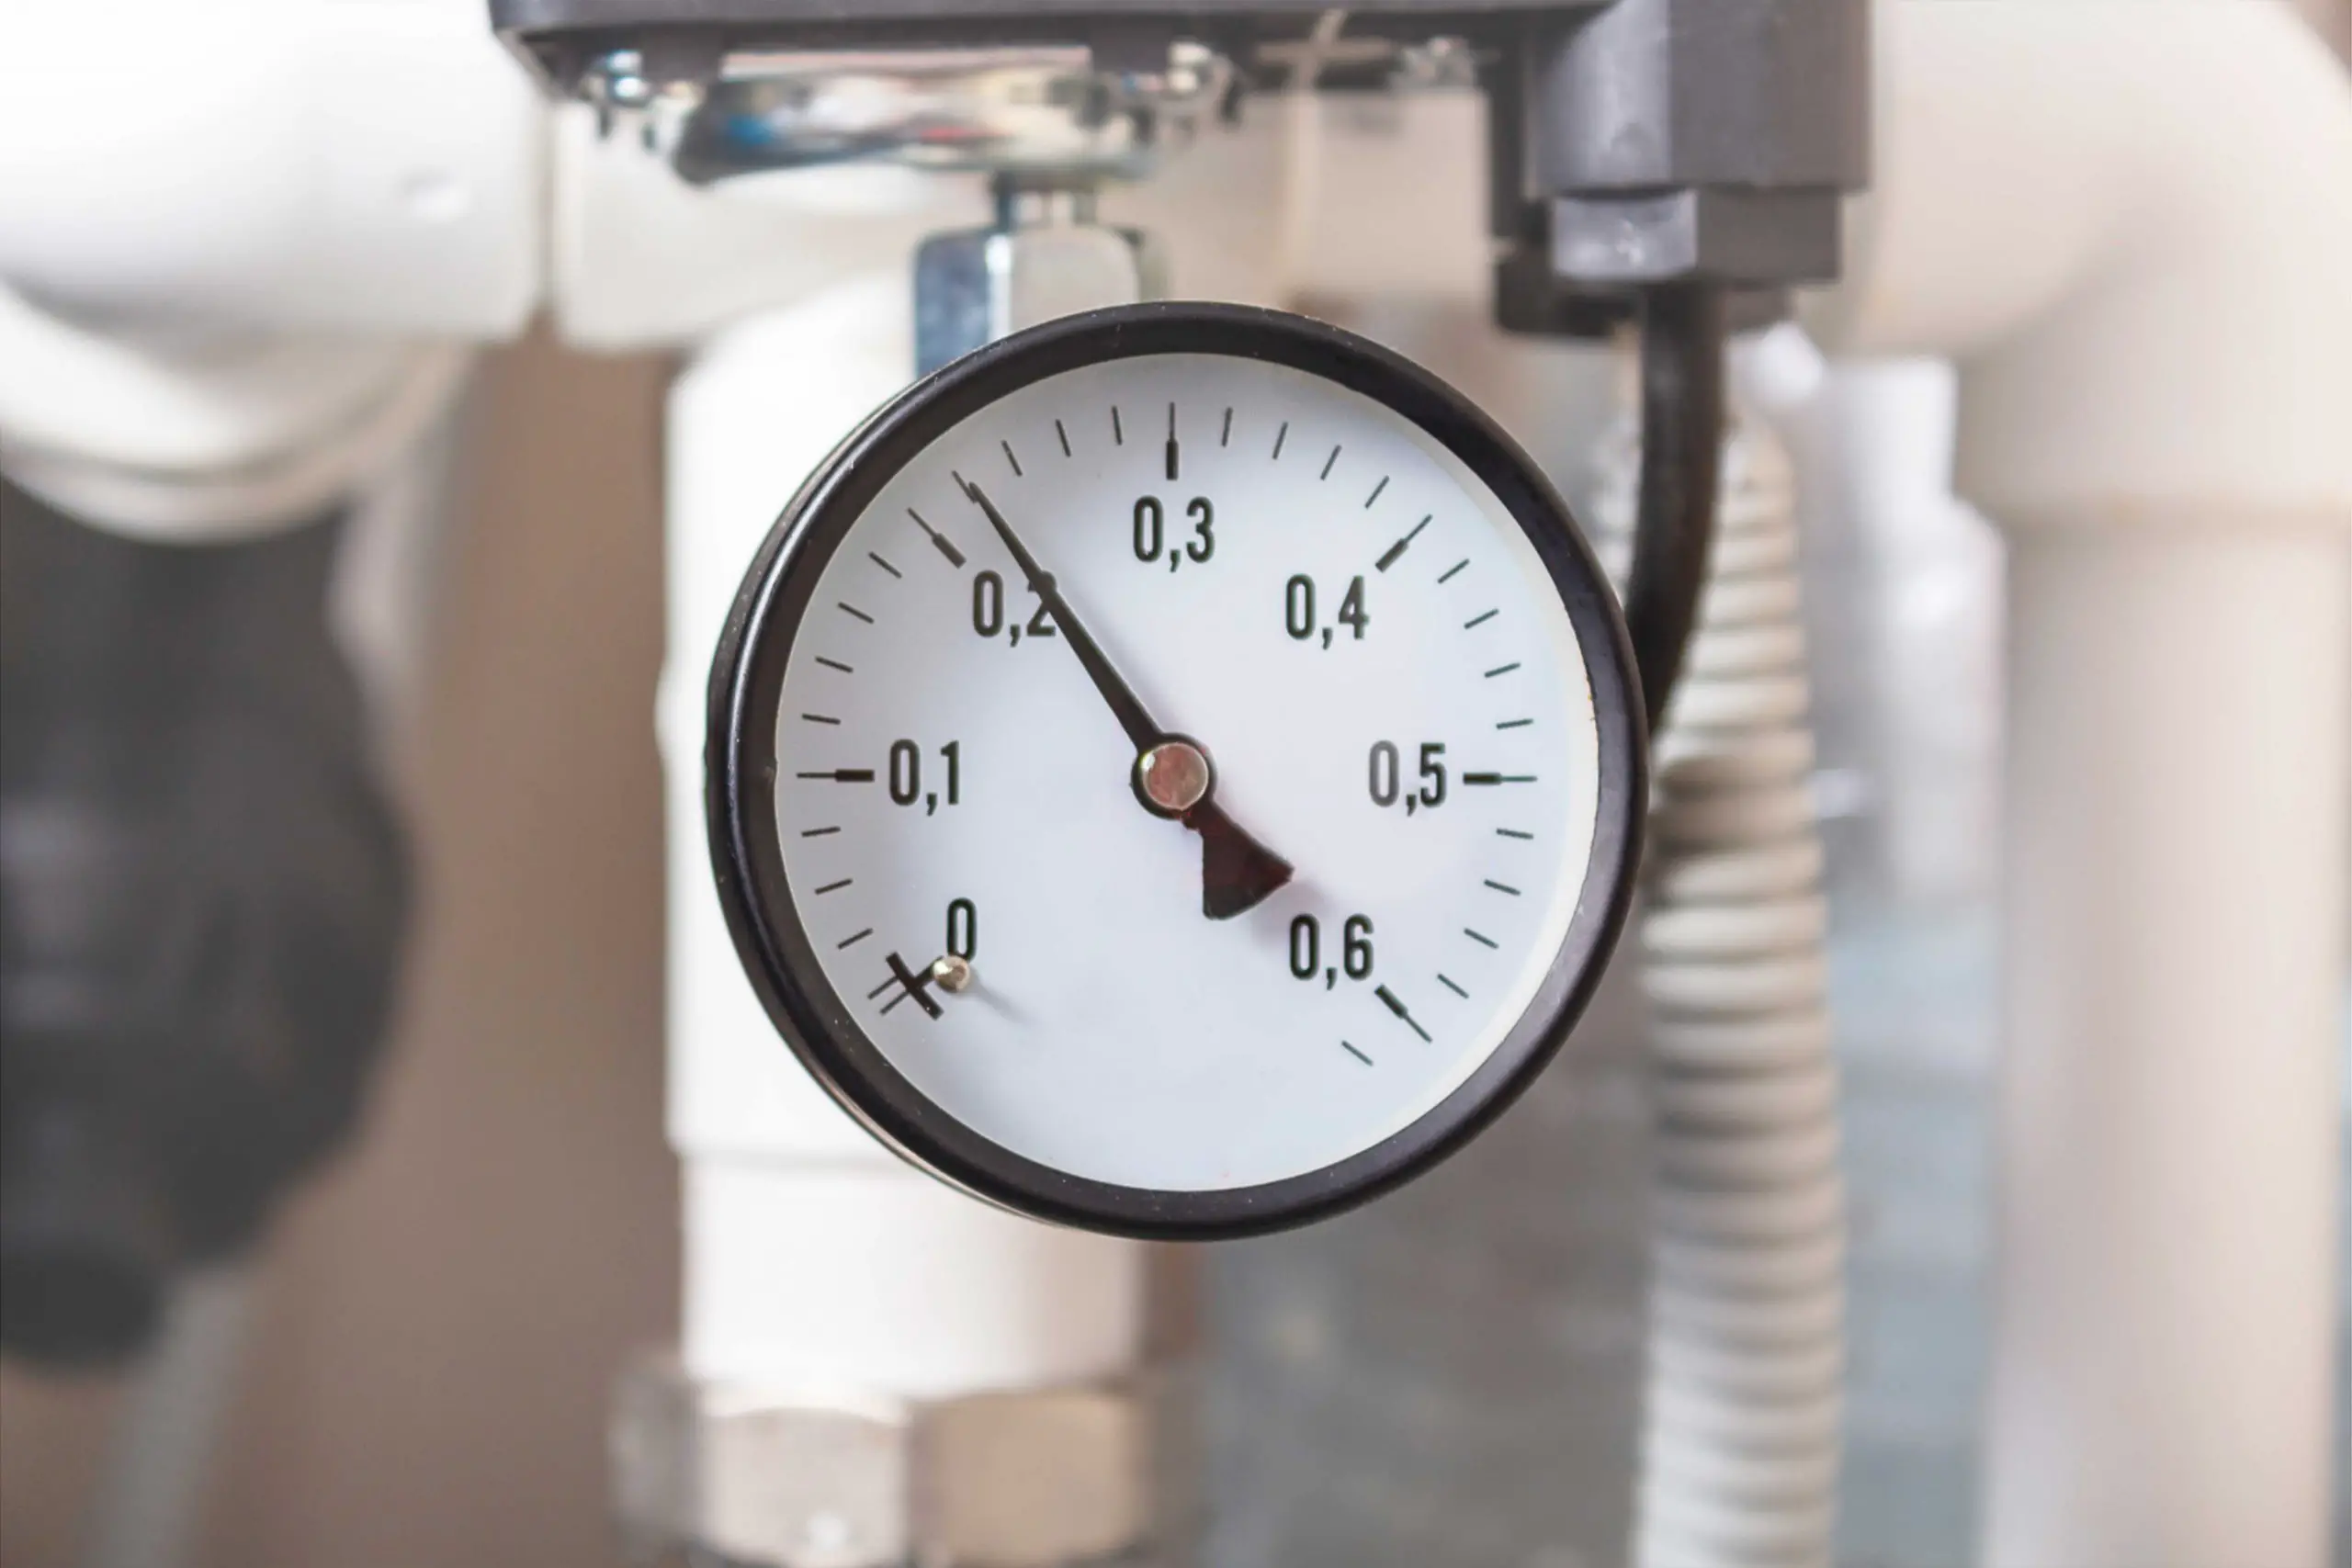 How to adjust Kinetico water softener